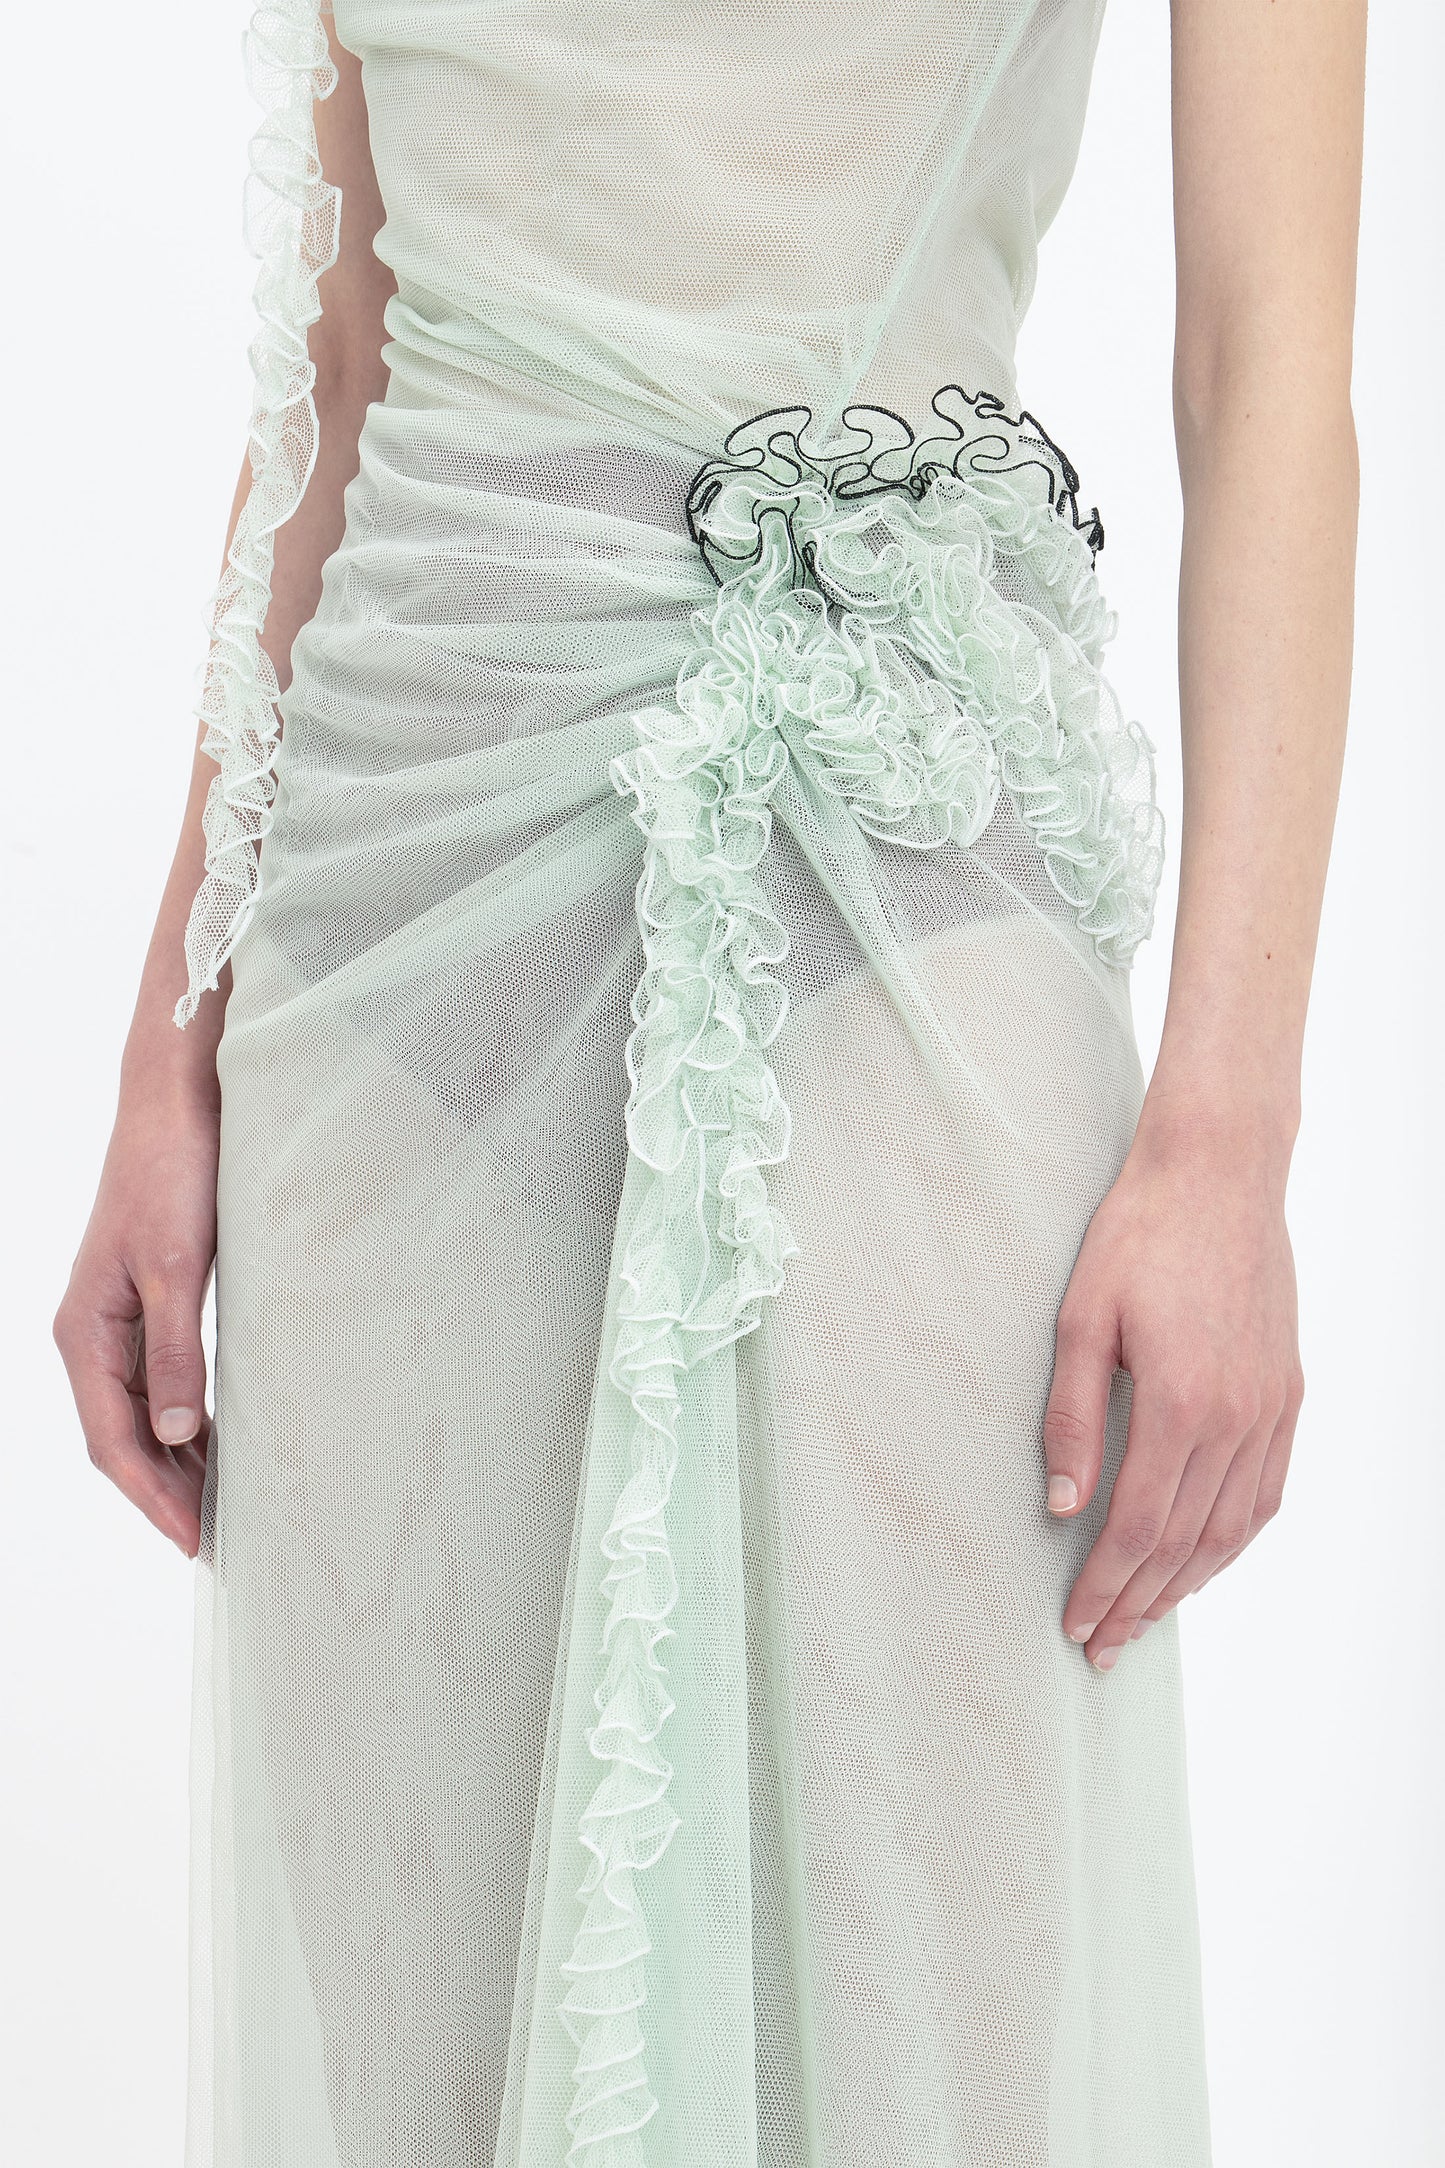 A close-up of a person wearing a Gathered Tulle Detail Floor-Length Dress In Jade by Victoria Beckham, with sheer ruched details and a black accent at the waist. The image shows the ethereal gown from shoulder to mid-thigh, reminiscent of something you might find on VictoriaBeckham.com.